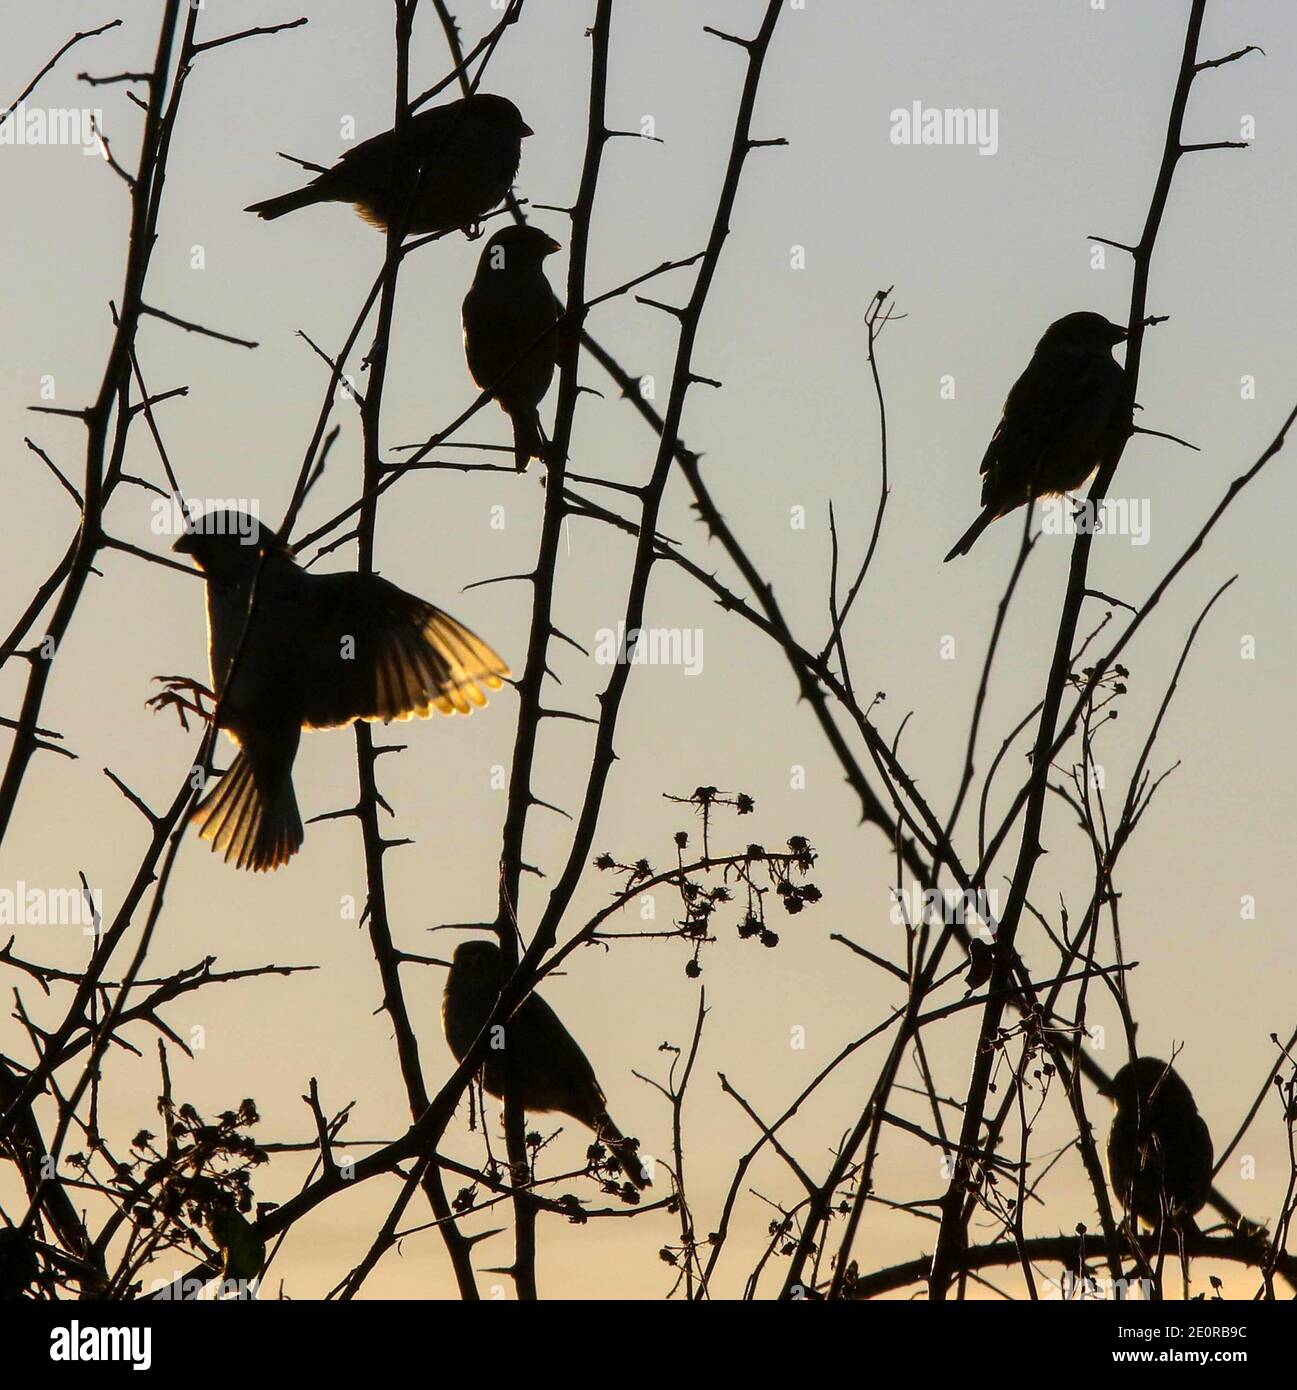 Magheralin, County Armagh, Northern Ireland. 02 Jan 2021. Uk weather - a cold afternoon with long sunny spells. The clear sky means temperatures will again plummet with freezing conditions overnight. Sparrows on winter hedgerow as the January sun sets,.January Credit: CAZIMB/Alamy Live News. Stock Photo